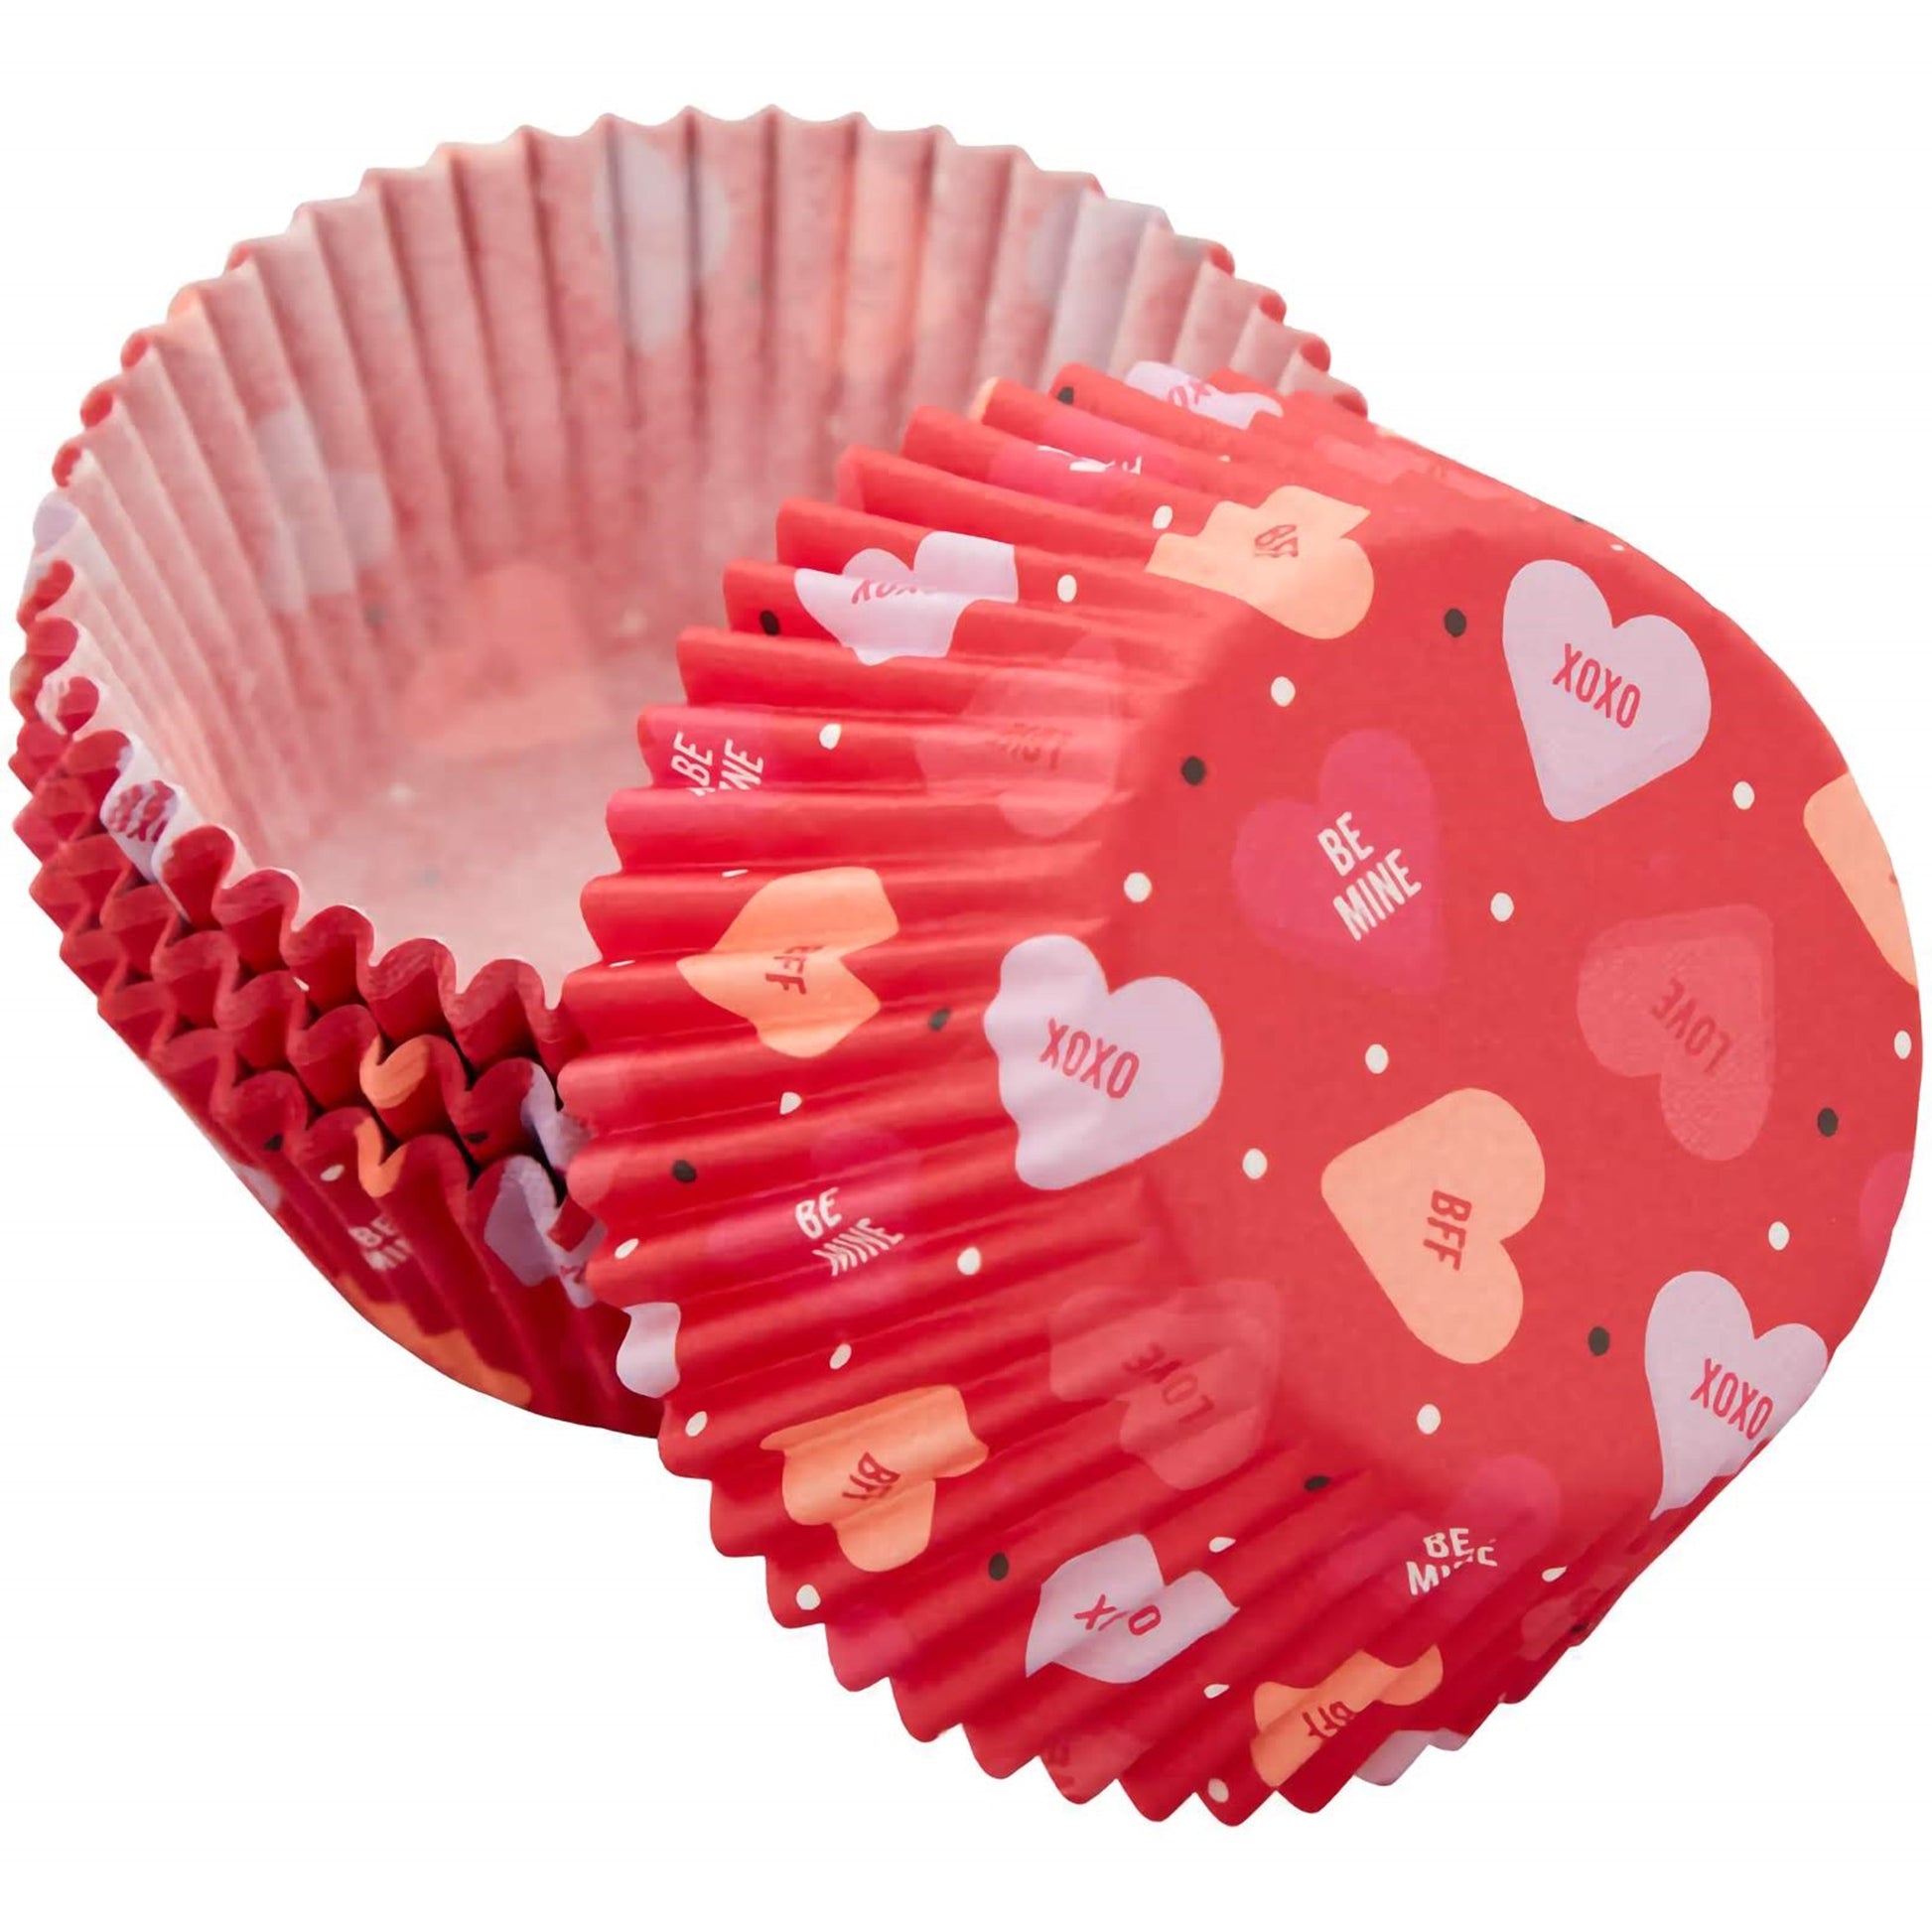 A stack of red cupcake baking cups with Valentine-themed phrases like "XOXO," "LOVE," "BFF," and "Be Mine" printed in white, along with white heart shapes on a red background.